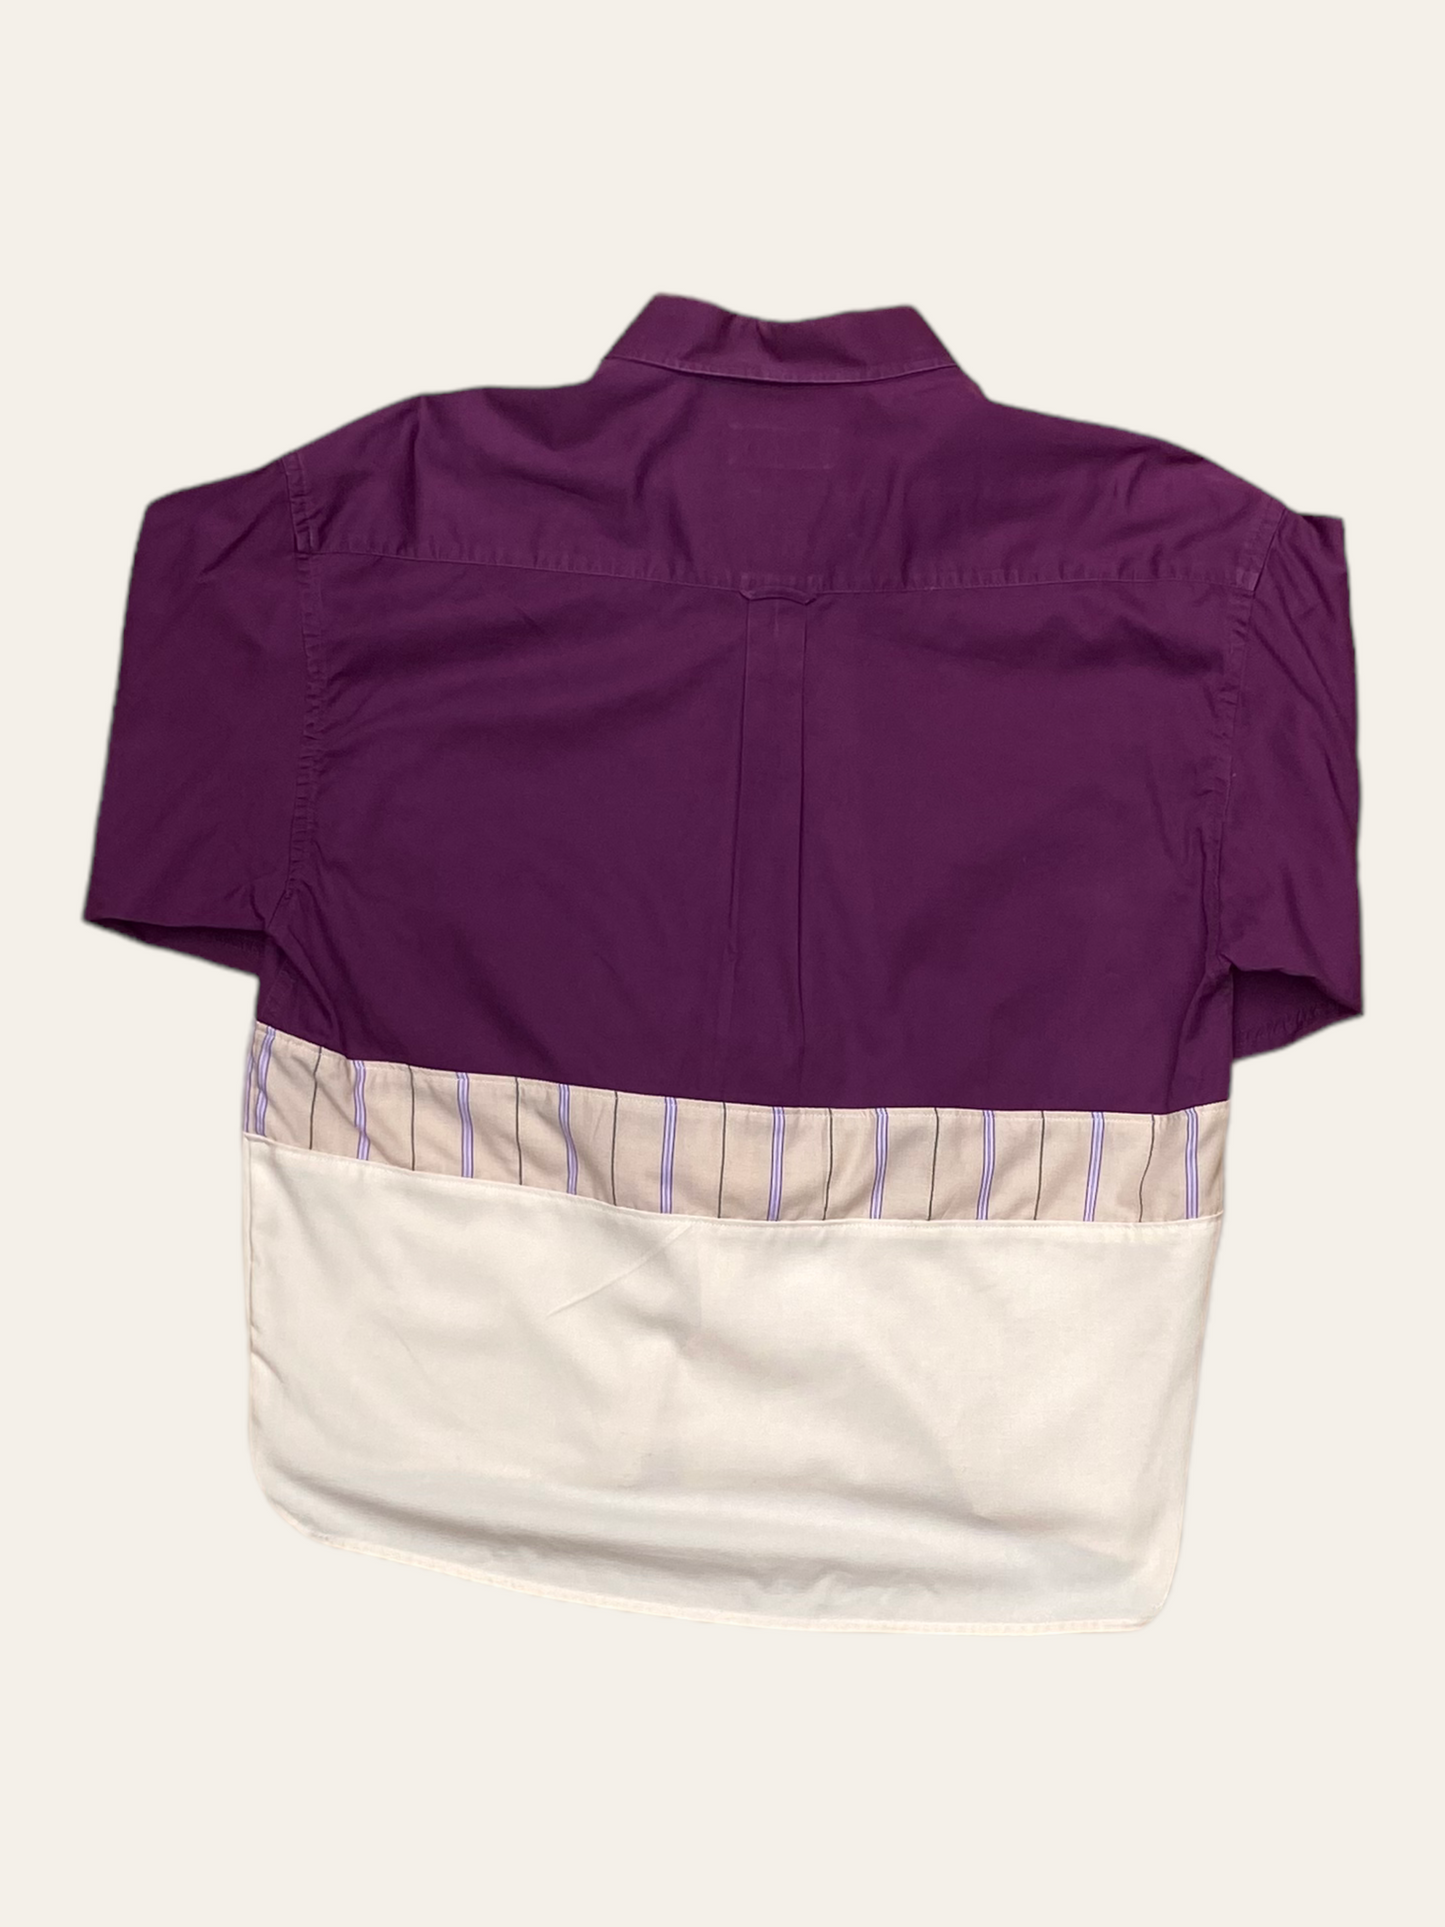 VINTAGE SHIRT UPCYCLED PURPLE AND WHITE - M